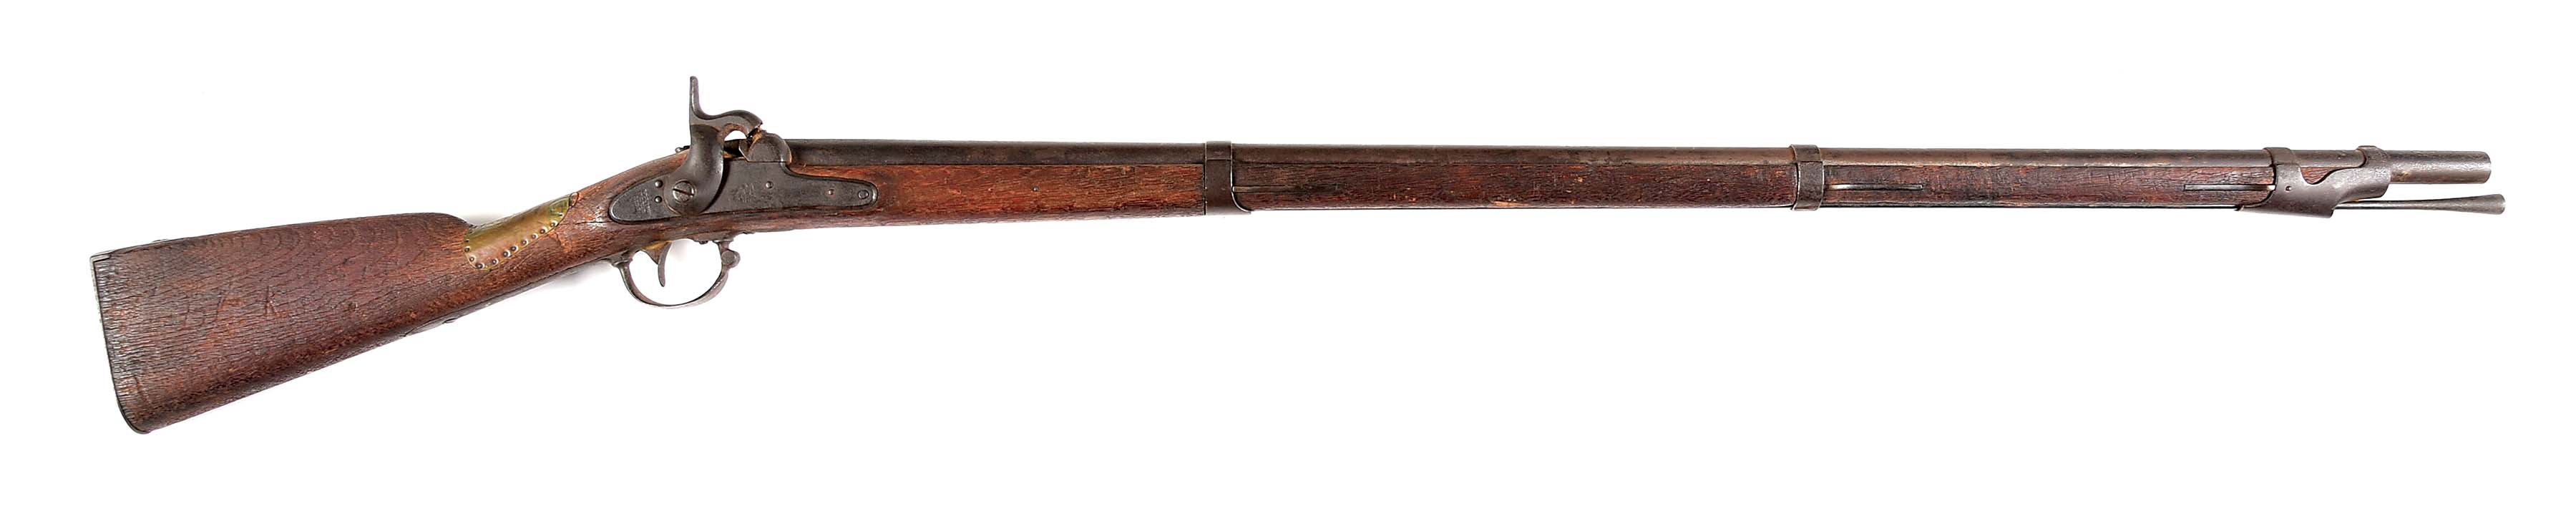 (a) model 1842 springfield percussion musket from battle of south mountain....